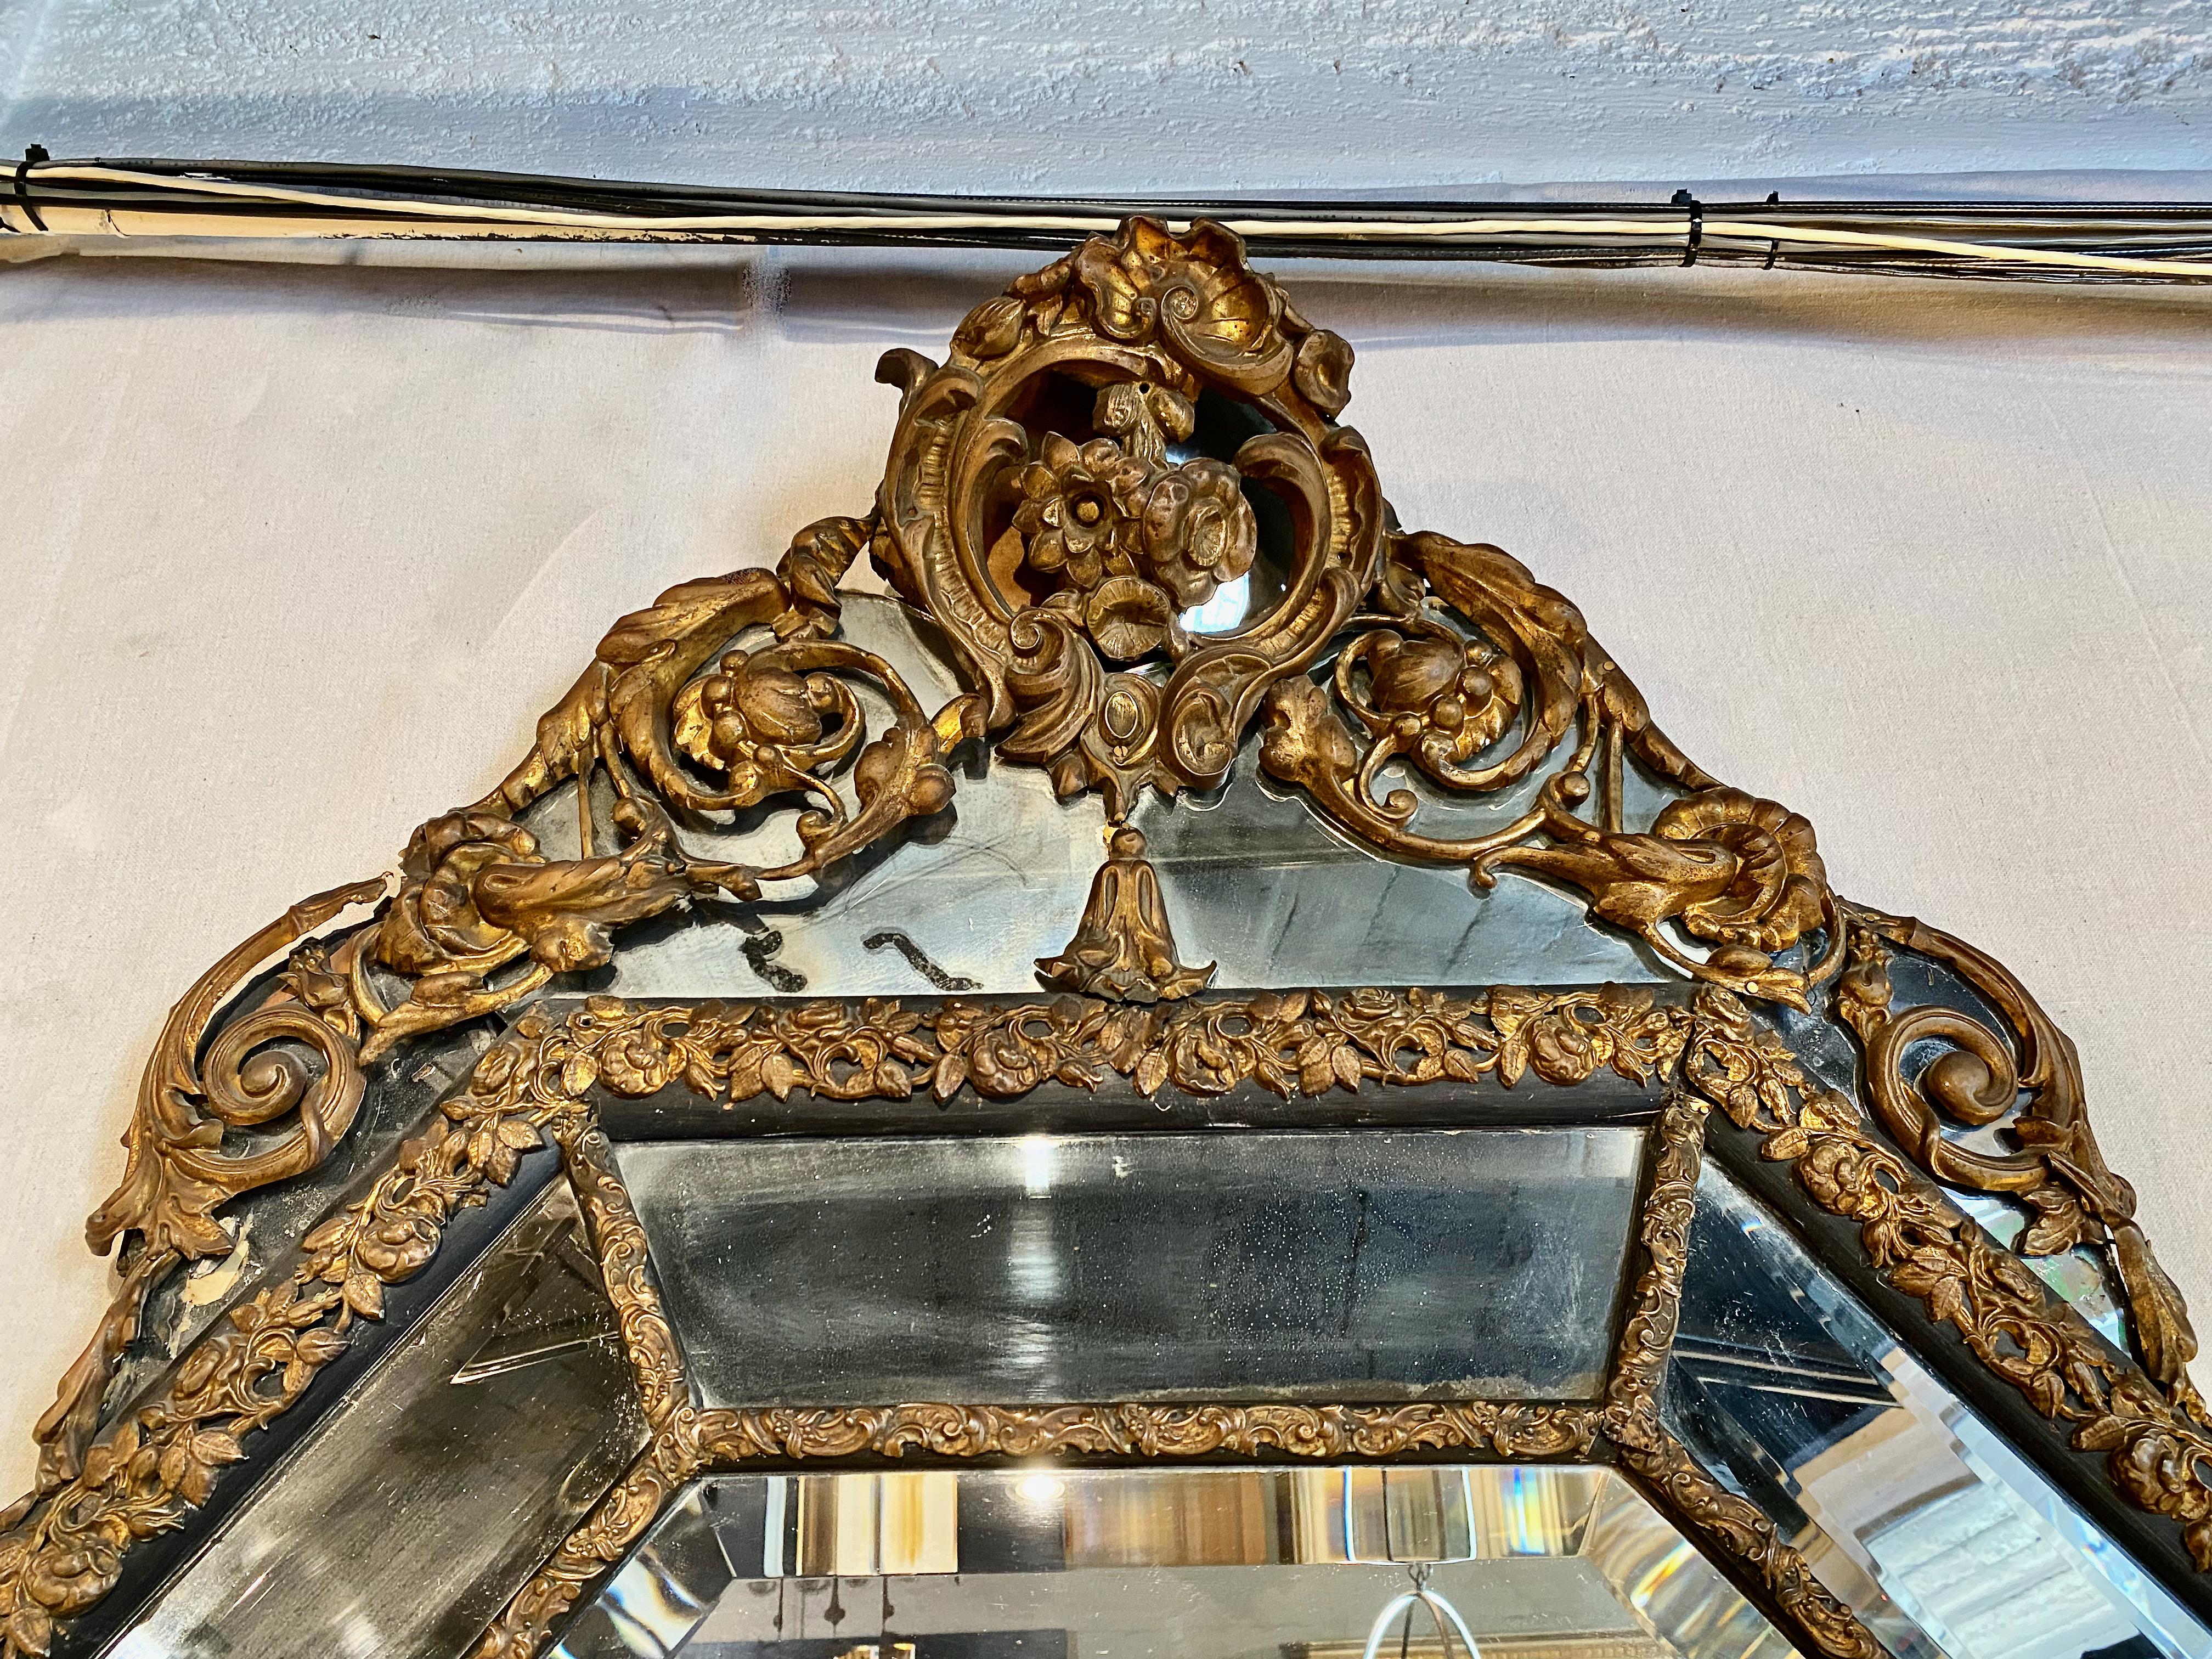 This is a very large octagonal cushion-form repousse brass mirror. The size alone makes this mirror unusual, when combined with the fact that the form is cushioned and octagonal, the mirror becomes spectacular. The mirrored sections are beveled